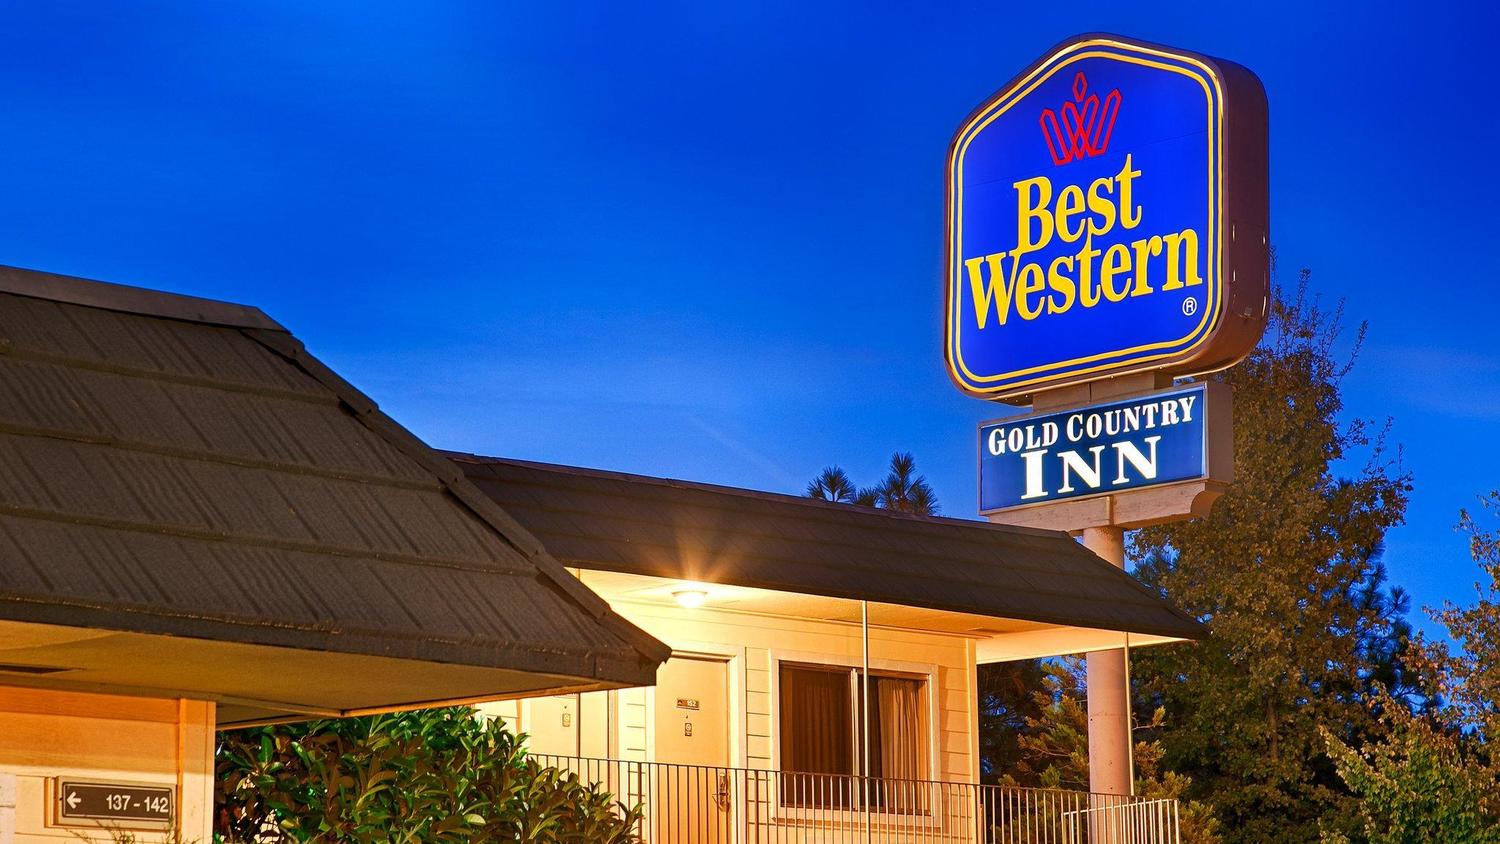 Best Western Gold Country, Grass Valley, CA Jobs ...